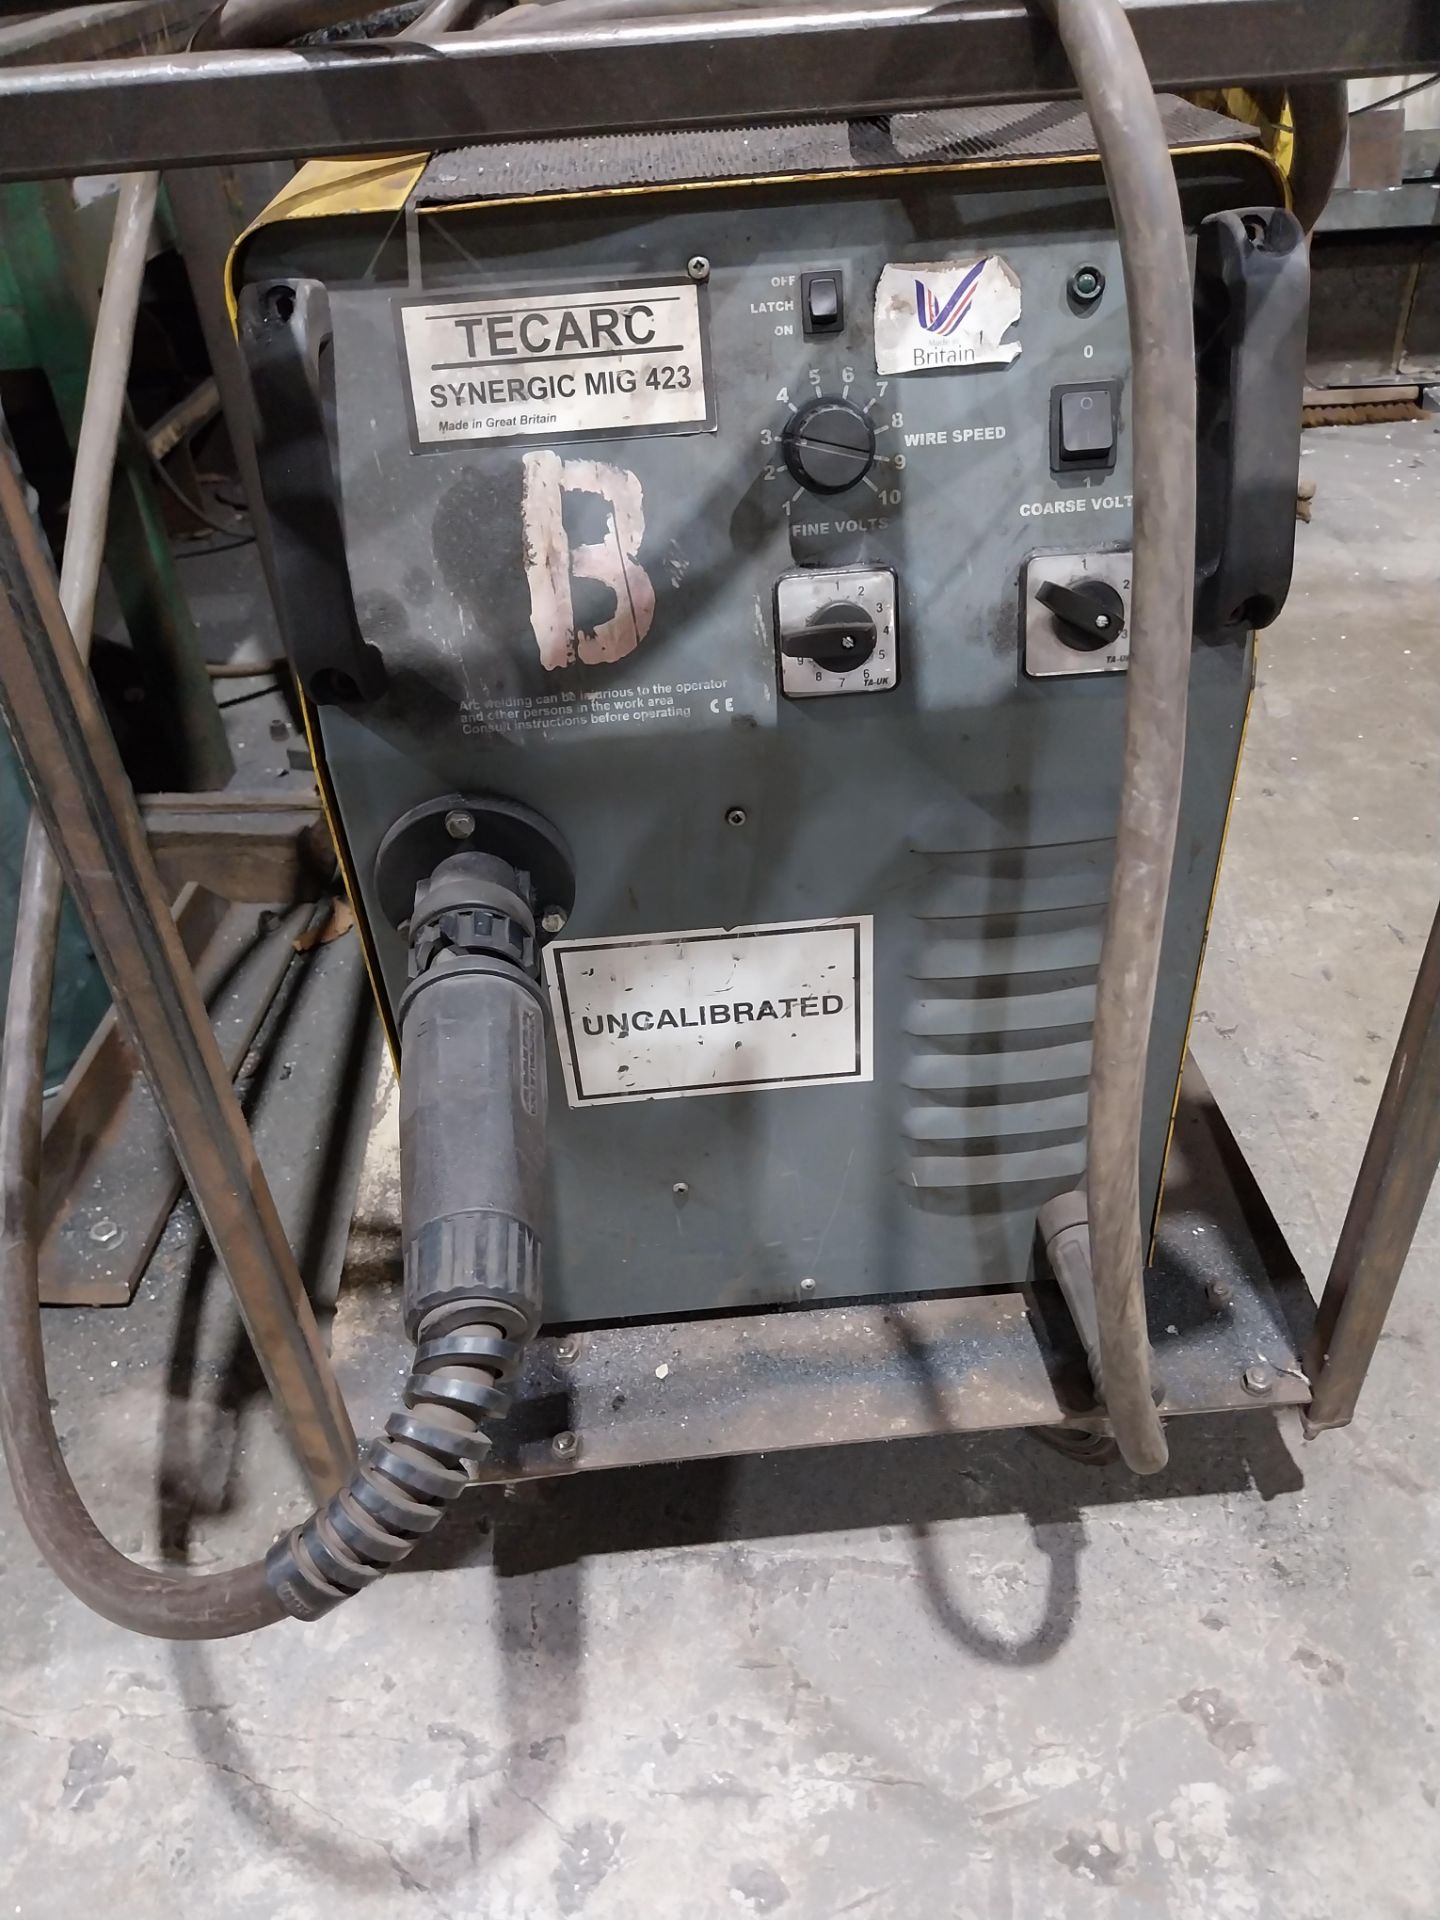 TecArc Synergic mig 423 mig welder with torch and clamp (bottle not included) - Image 2 of 4